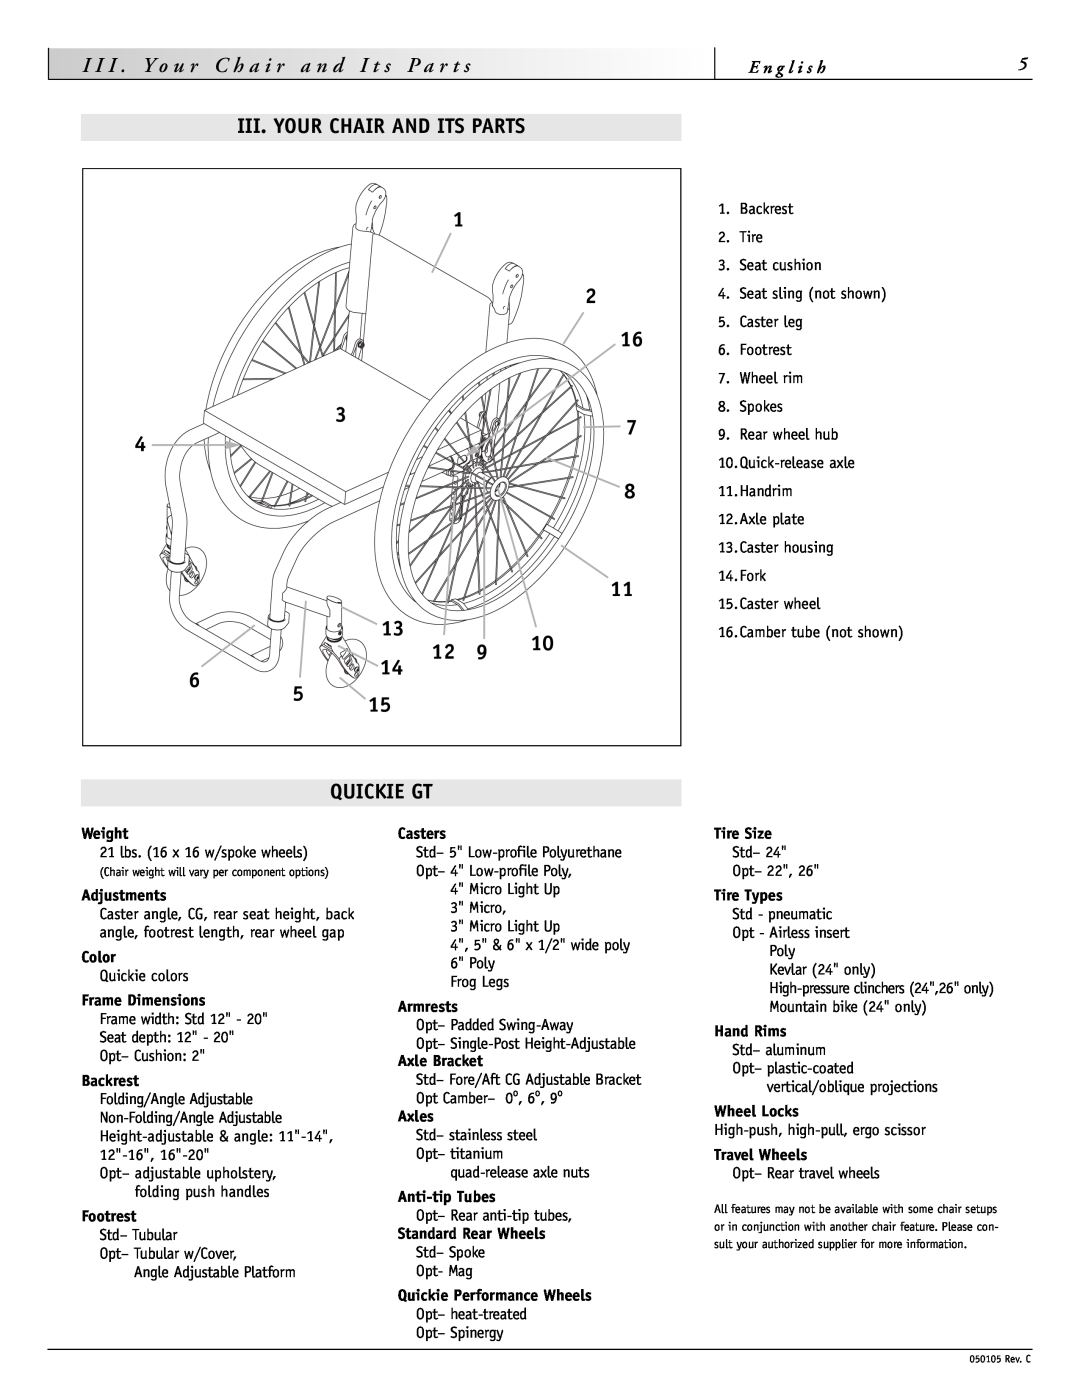 Sunrise Medical GT instruction manual Iii. Your Chair And Its Parts, Quickie Gt, I I I . Y o u r 